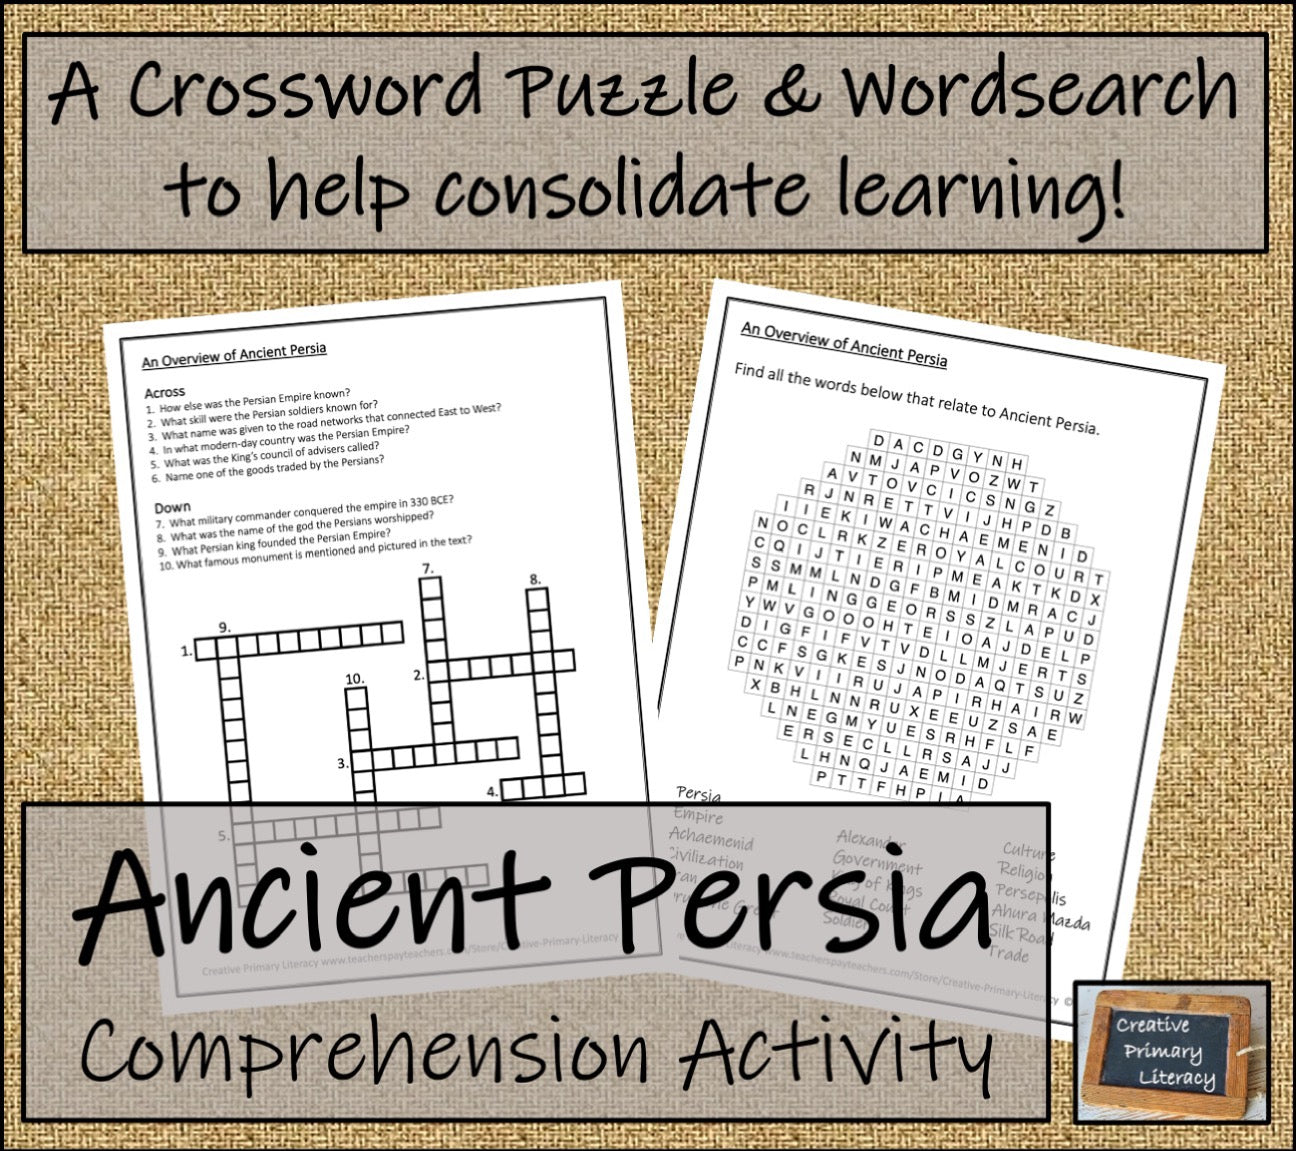 Ancient Persia Close Reading & Informational Writing Bundle | 5th & 6th Grade